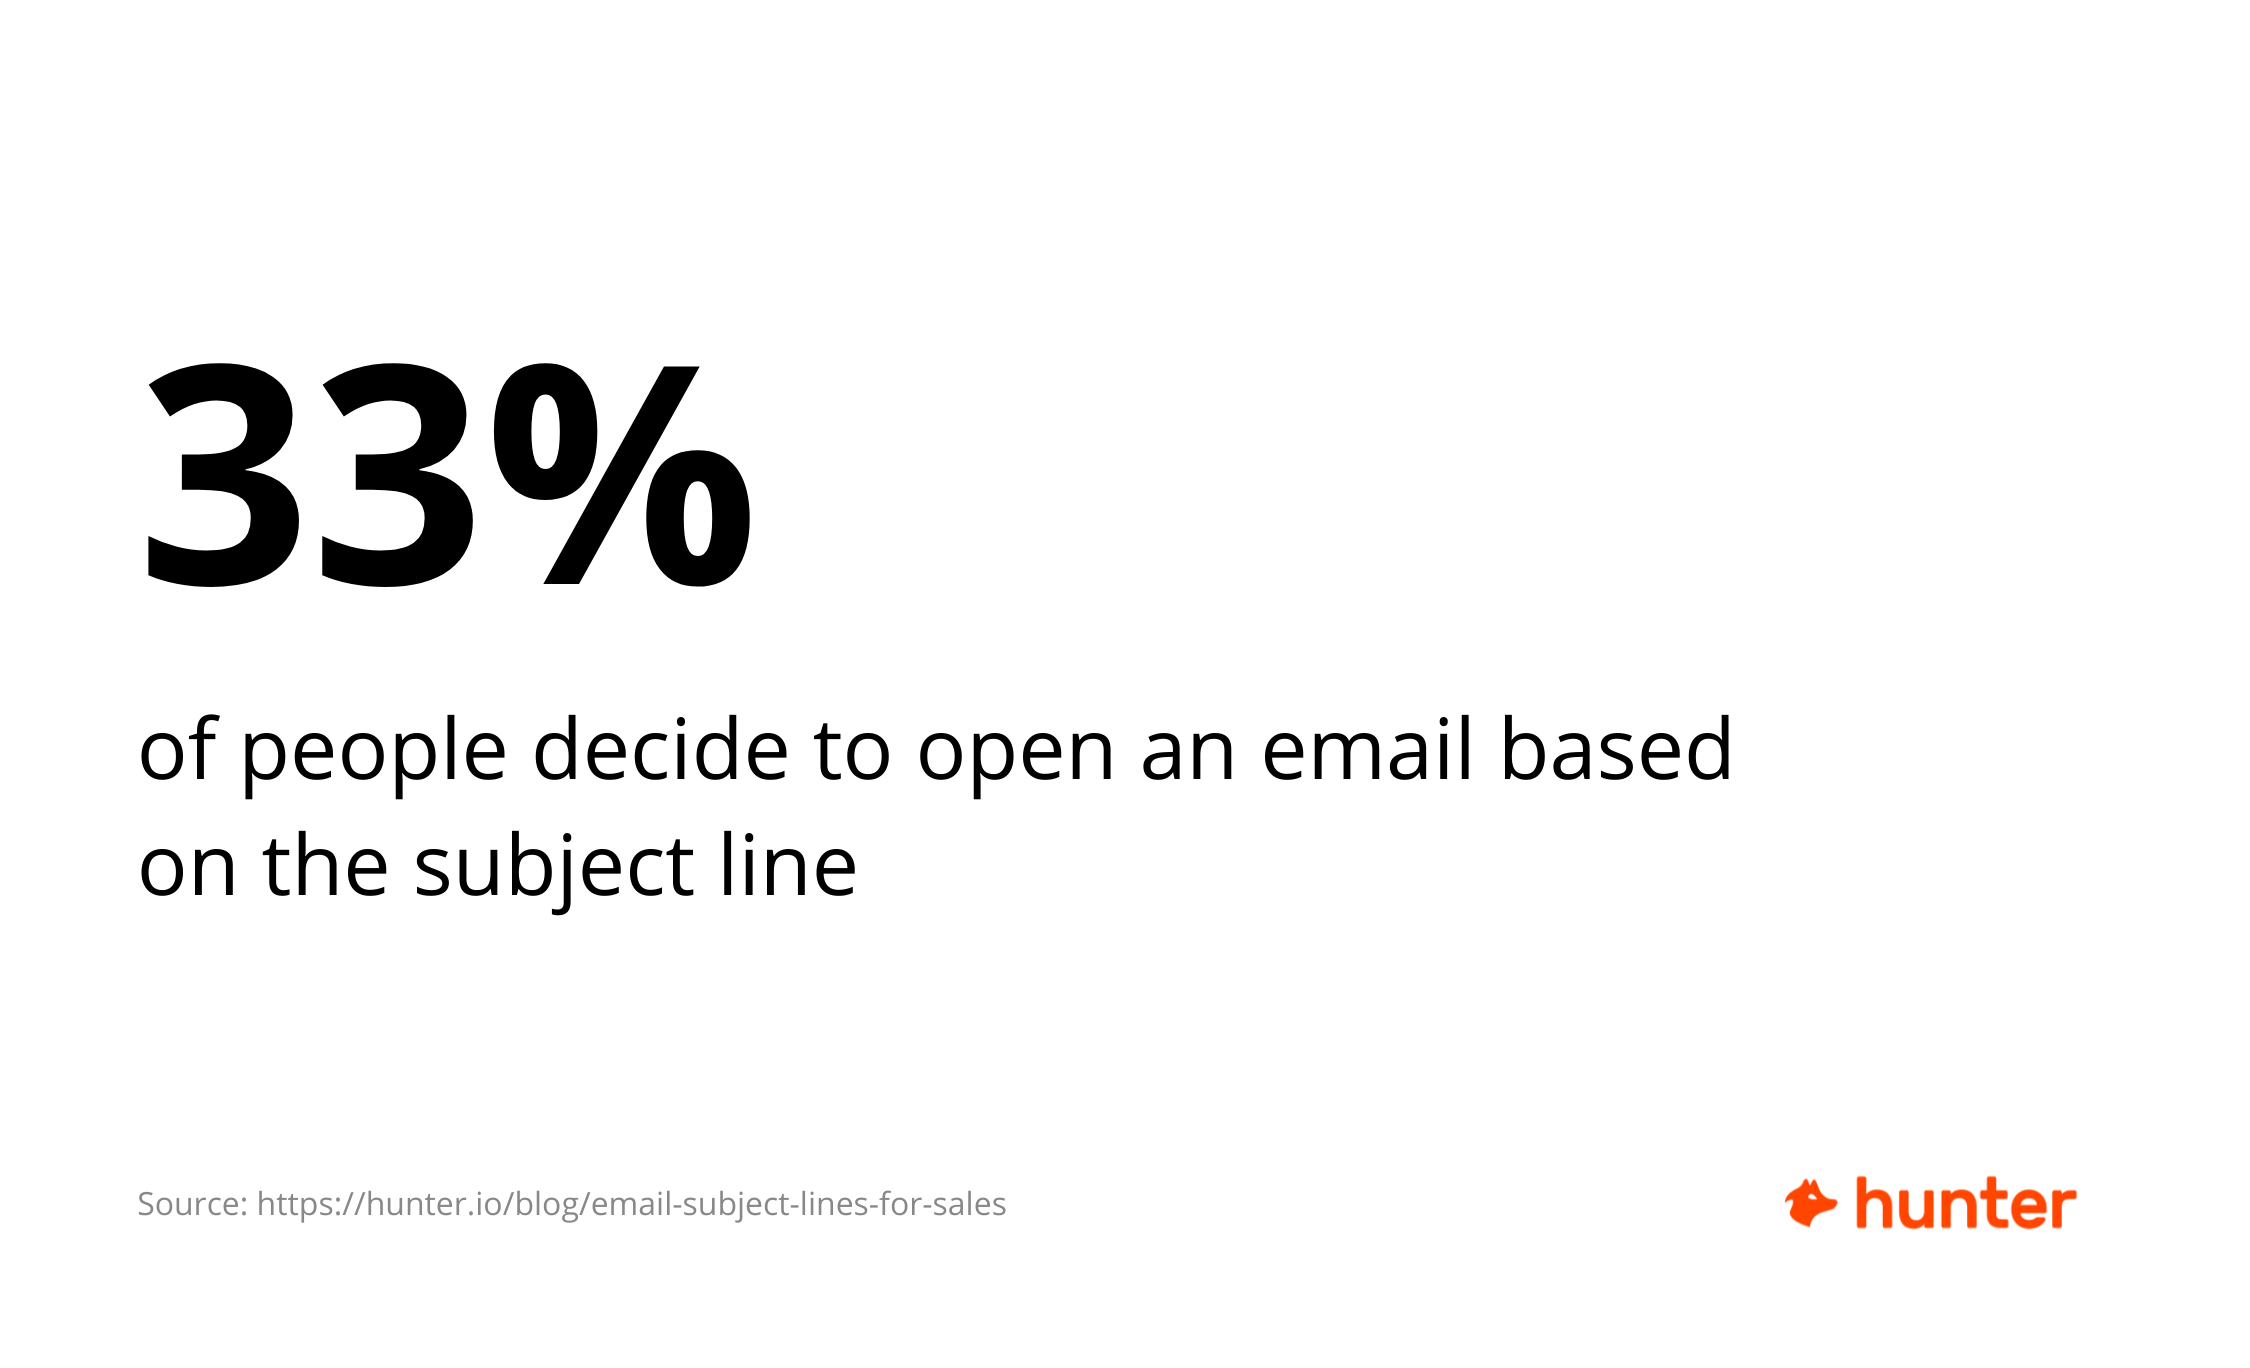 33% of people decide to open an email based on the subject line